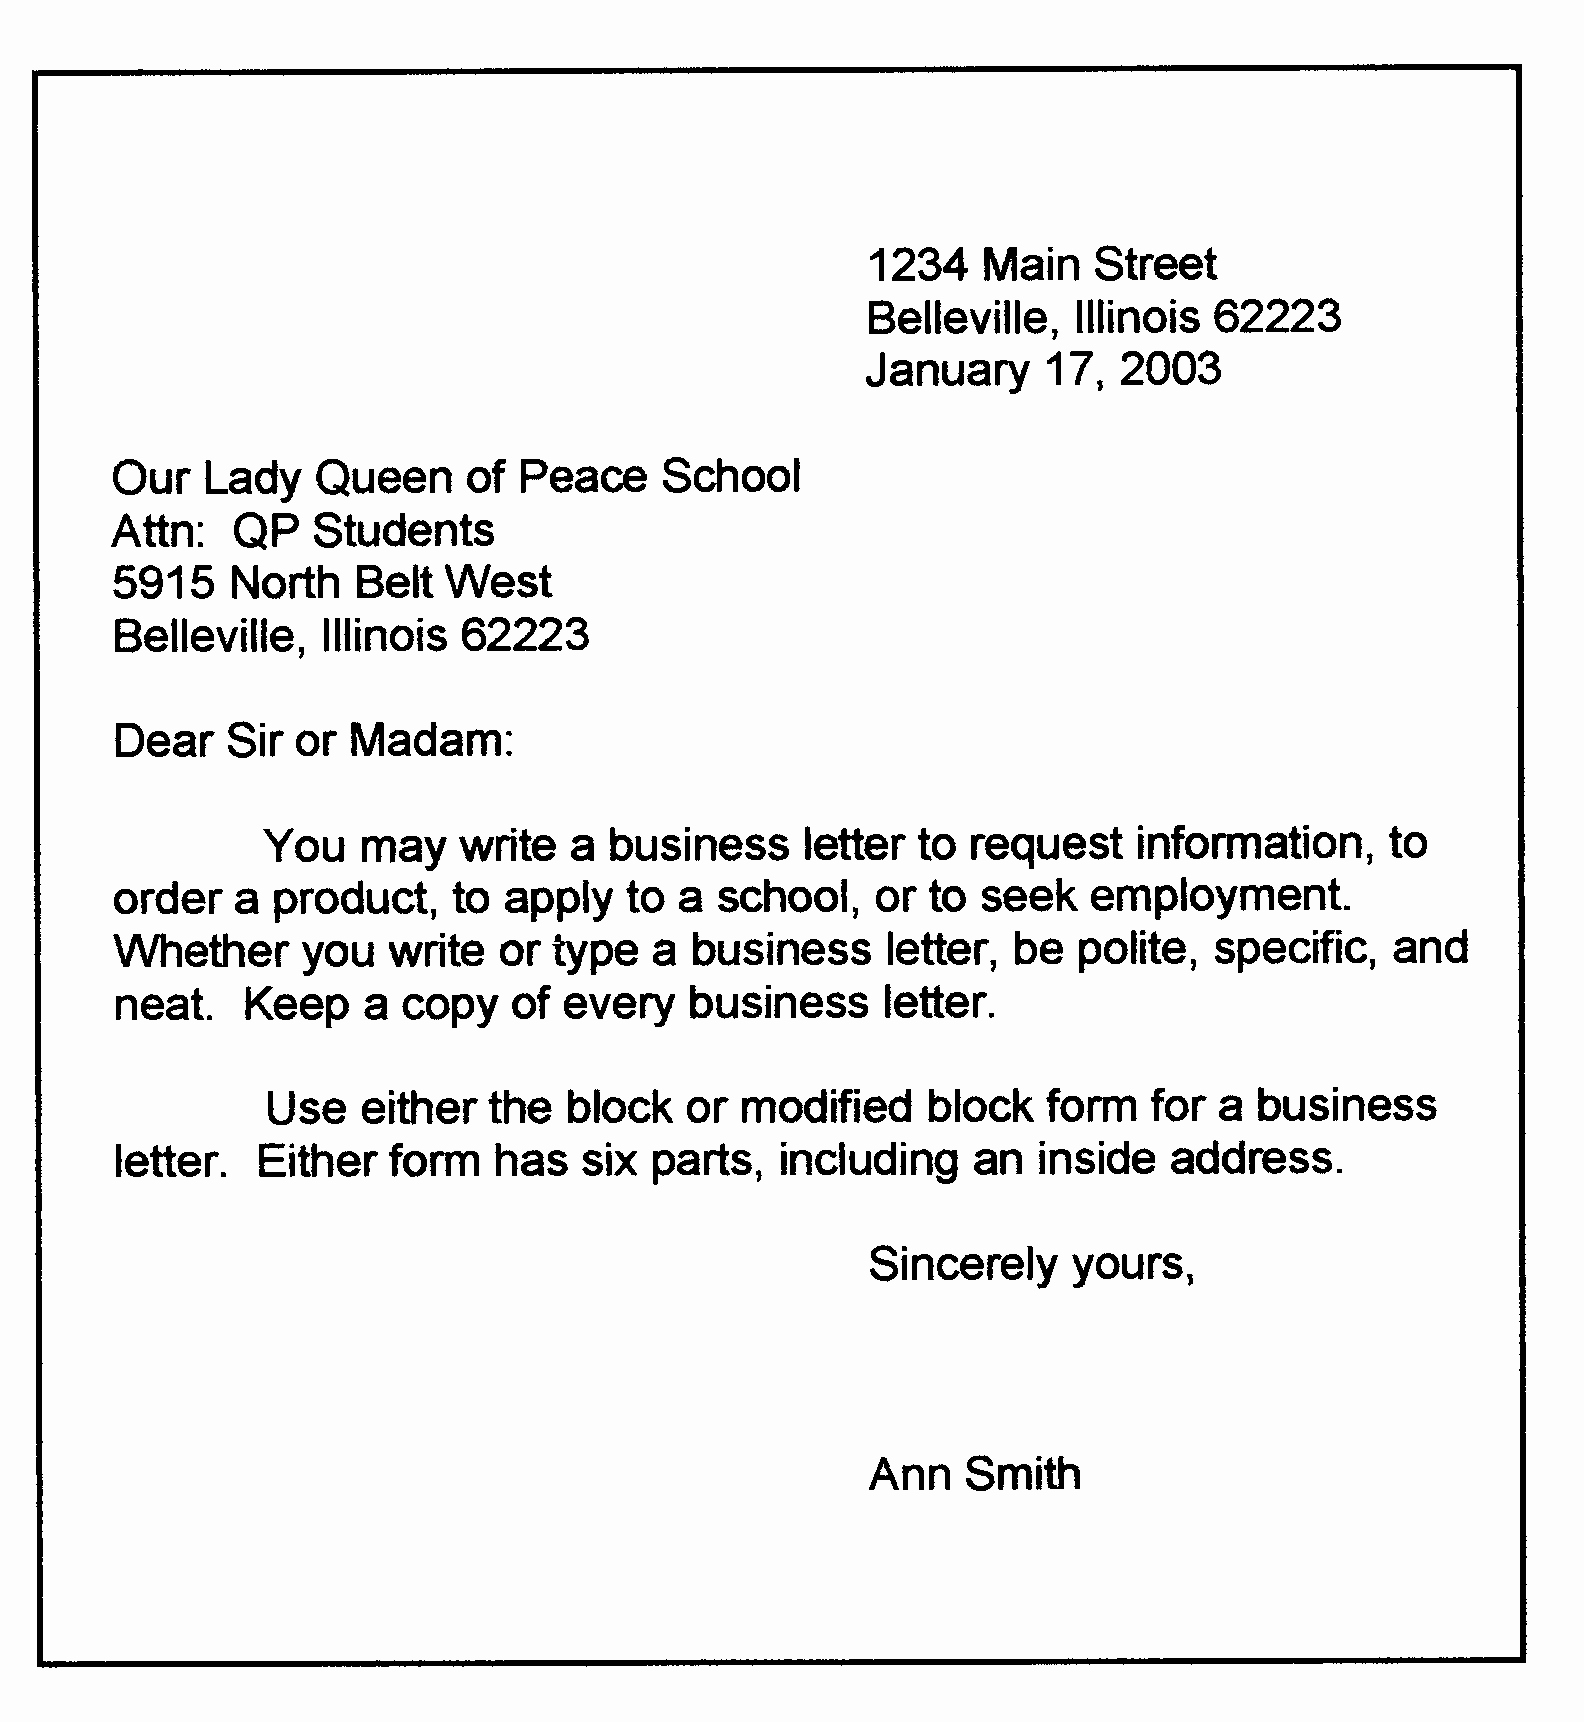 Personal Business Letter format